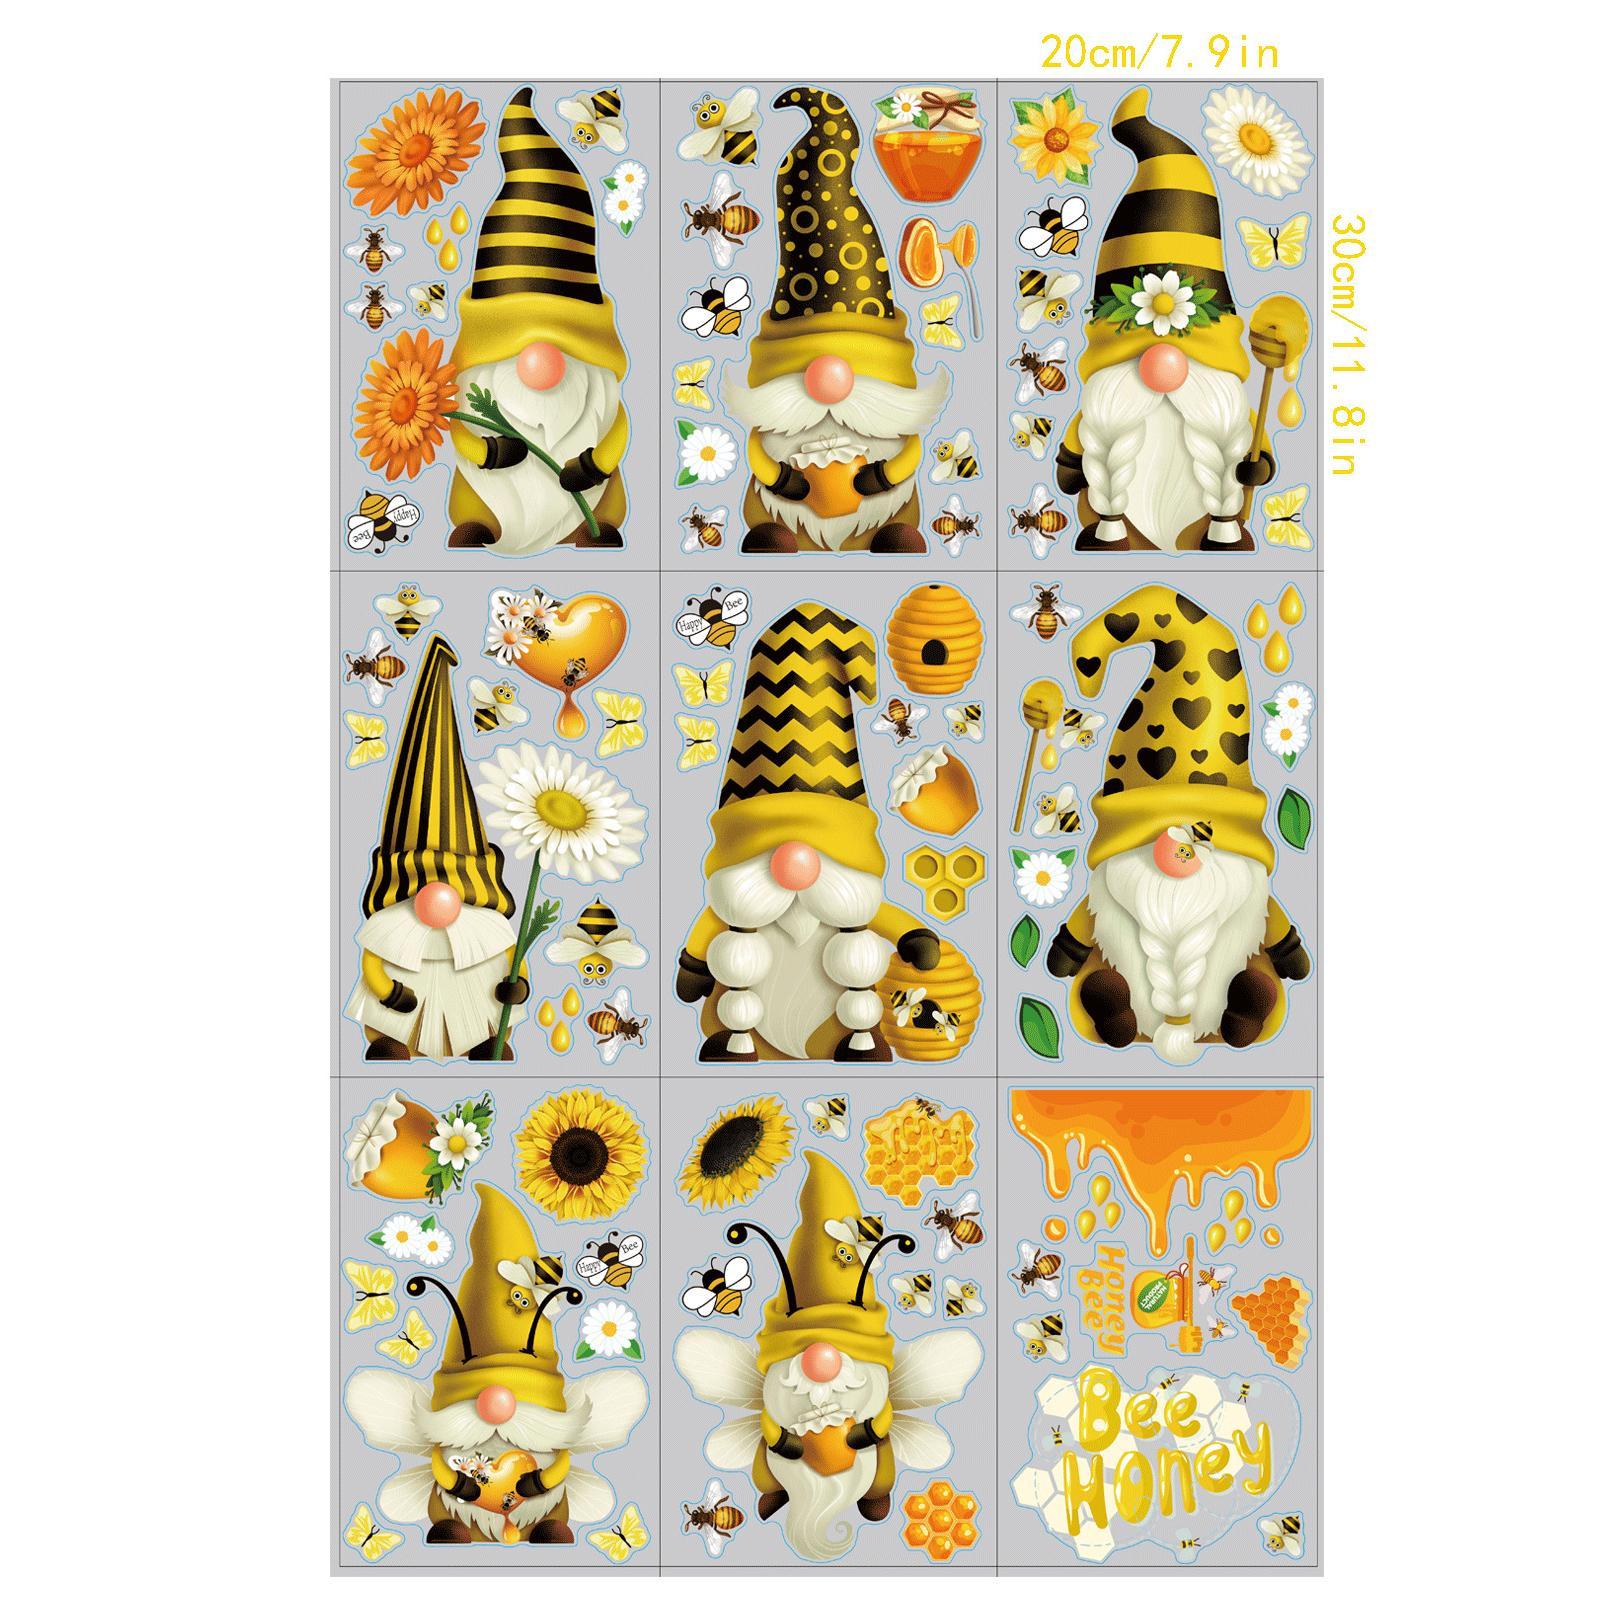 9 Sheets Honey Bee Gnome Stickers Removable for Bee Festival Home Classroom